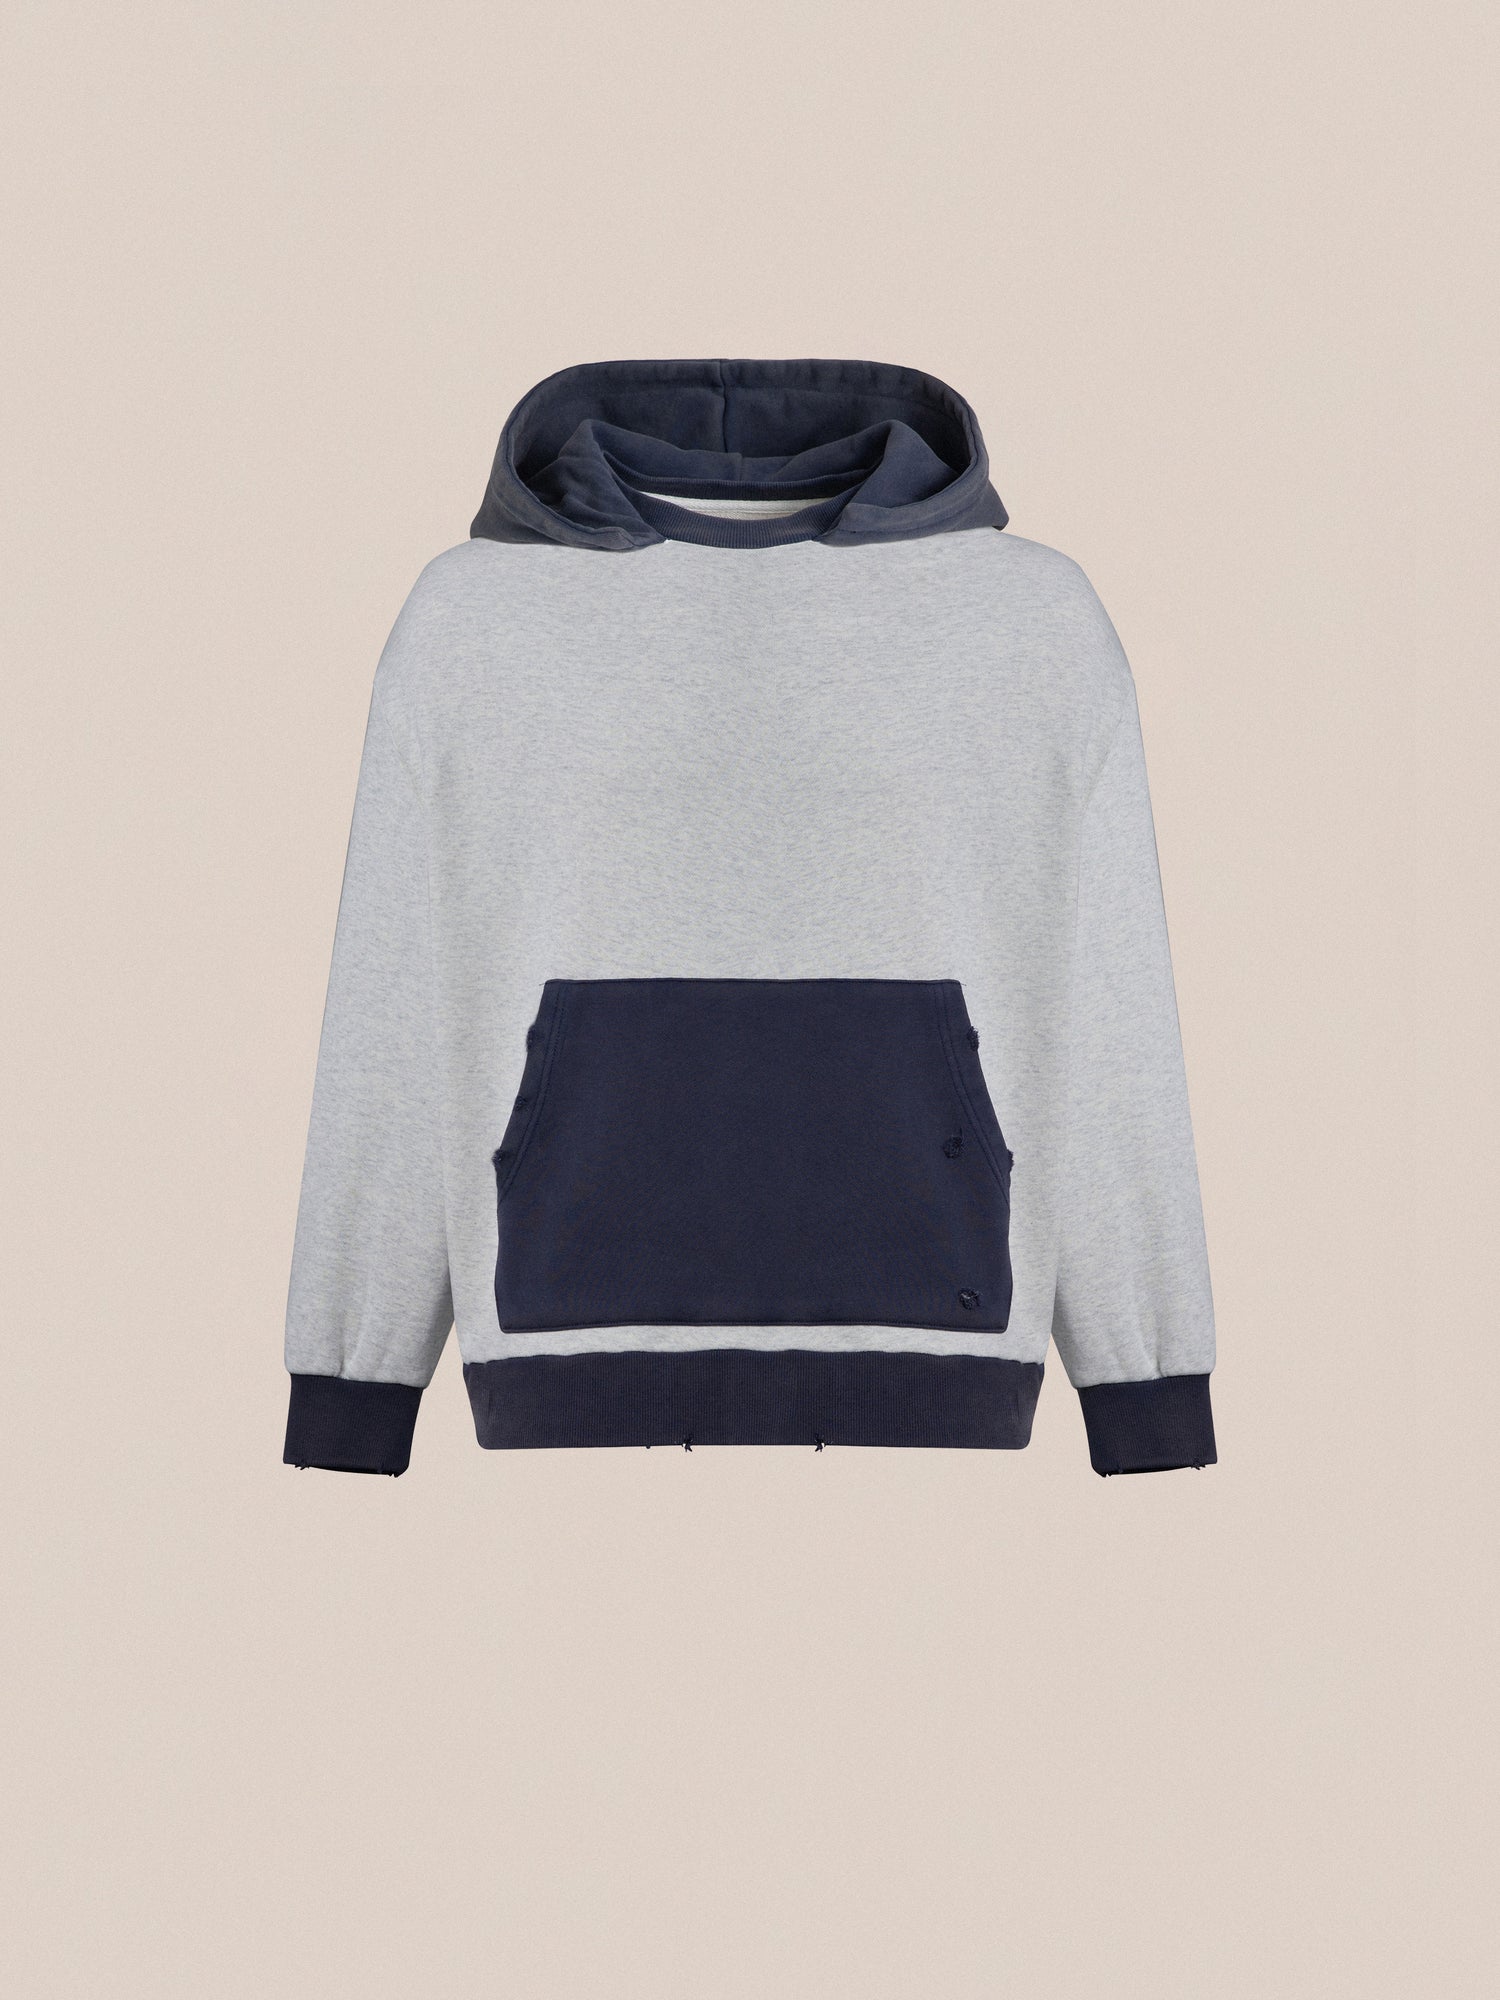 A grey and navy enzyme-washed cotton, Found Two Tone Hoodie.